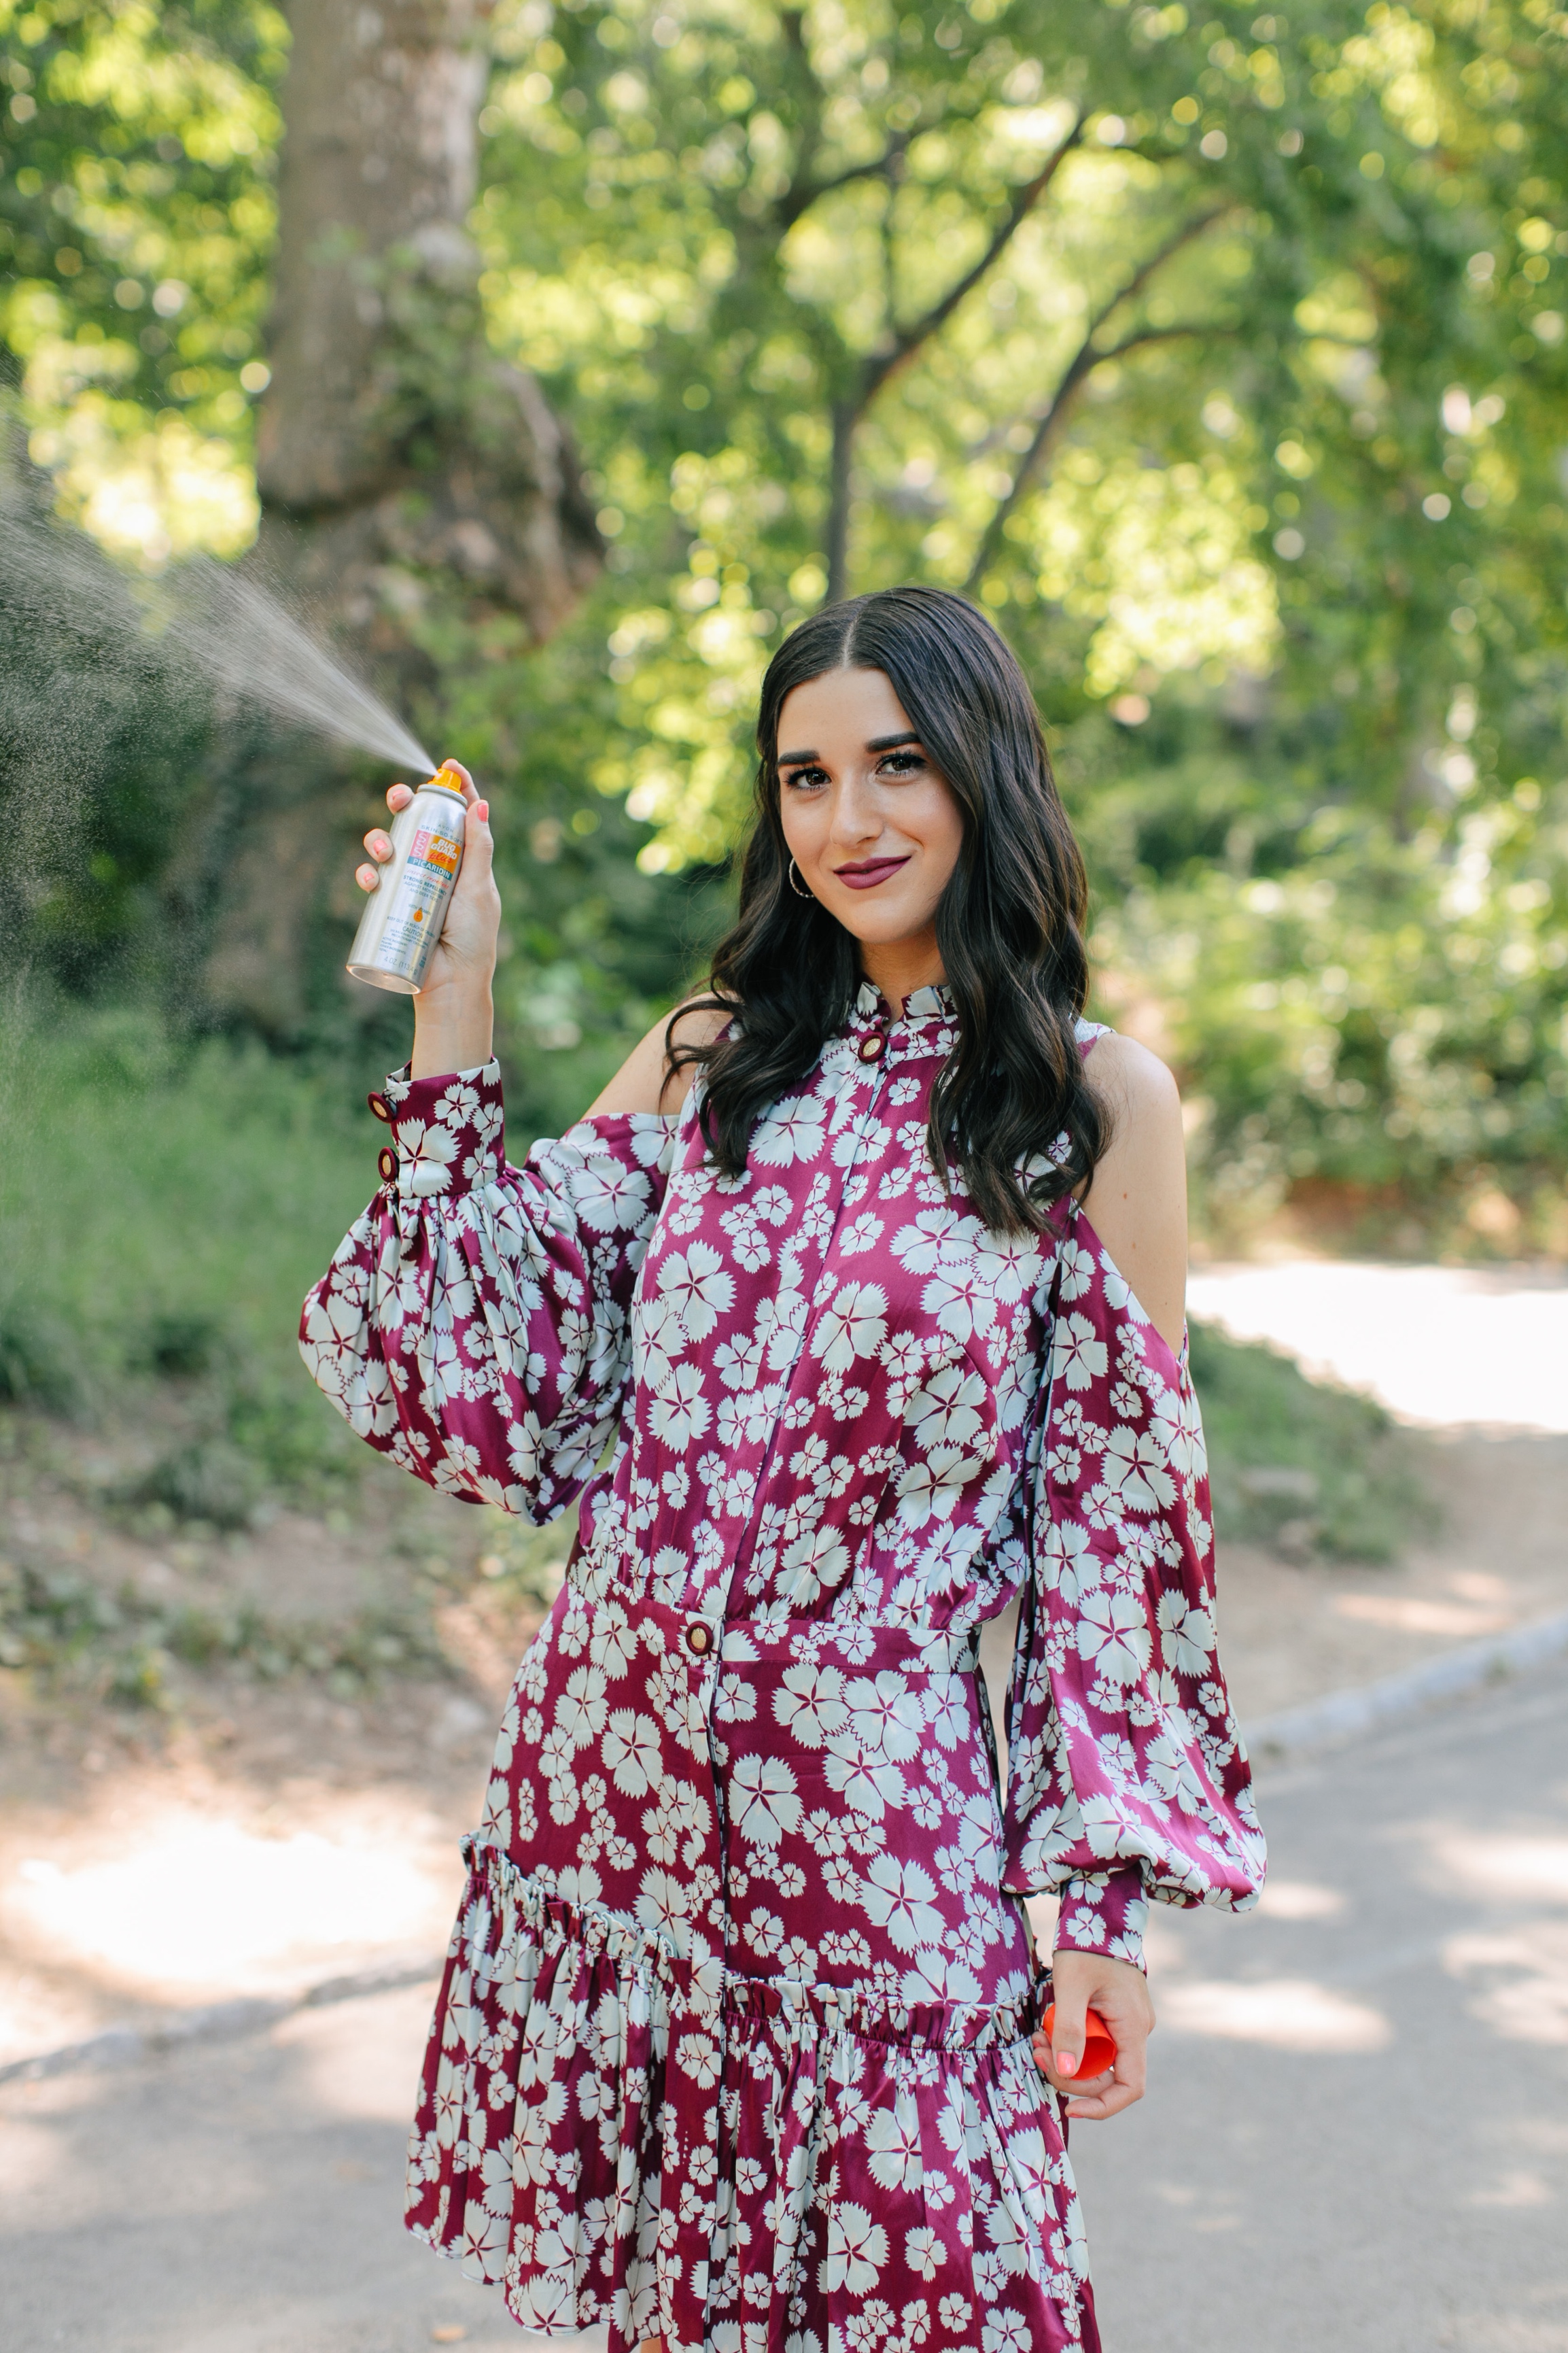 Bring On The Bug Spray Avon Bug Guard Esther Santer NYC Street Style Blogger Outdoors Adventure Explore Upstate New York Central Park Printed Dress  Designer Product Review Button Front Photoshoot Brand Collab Beauty Skincare Cold Shoulder Circle Bag.jpg